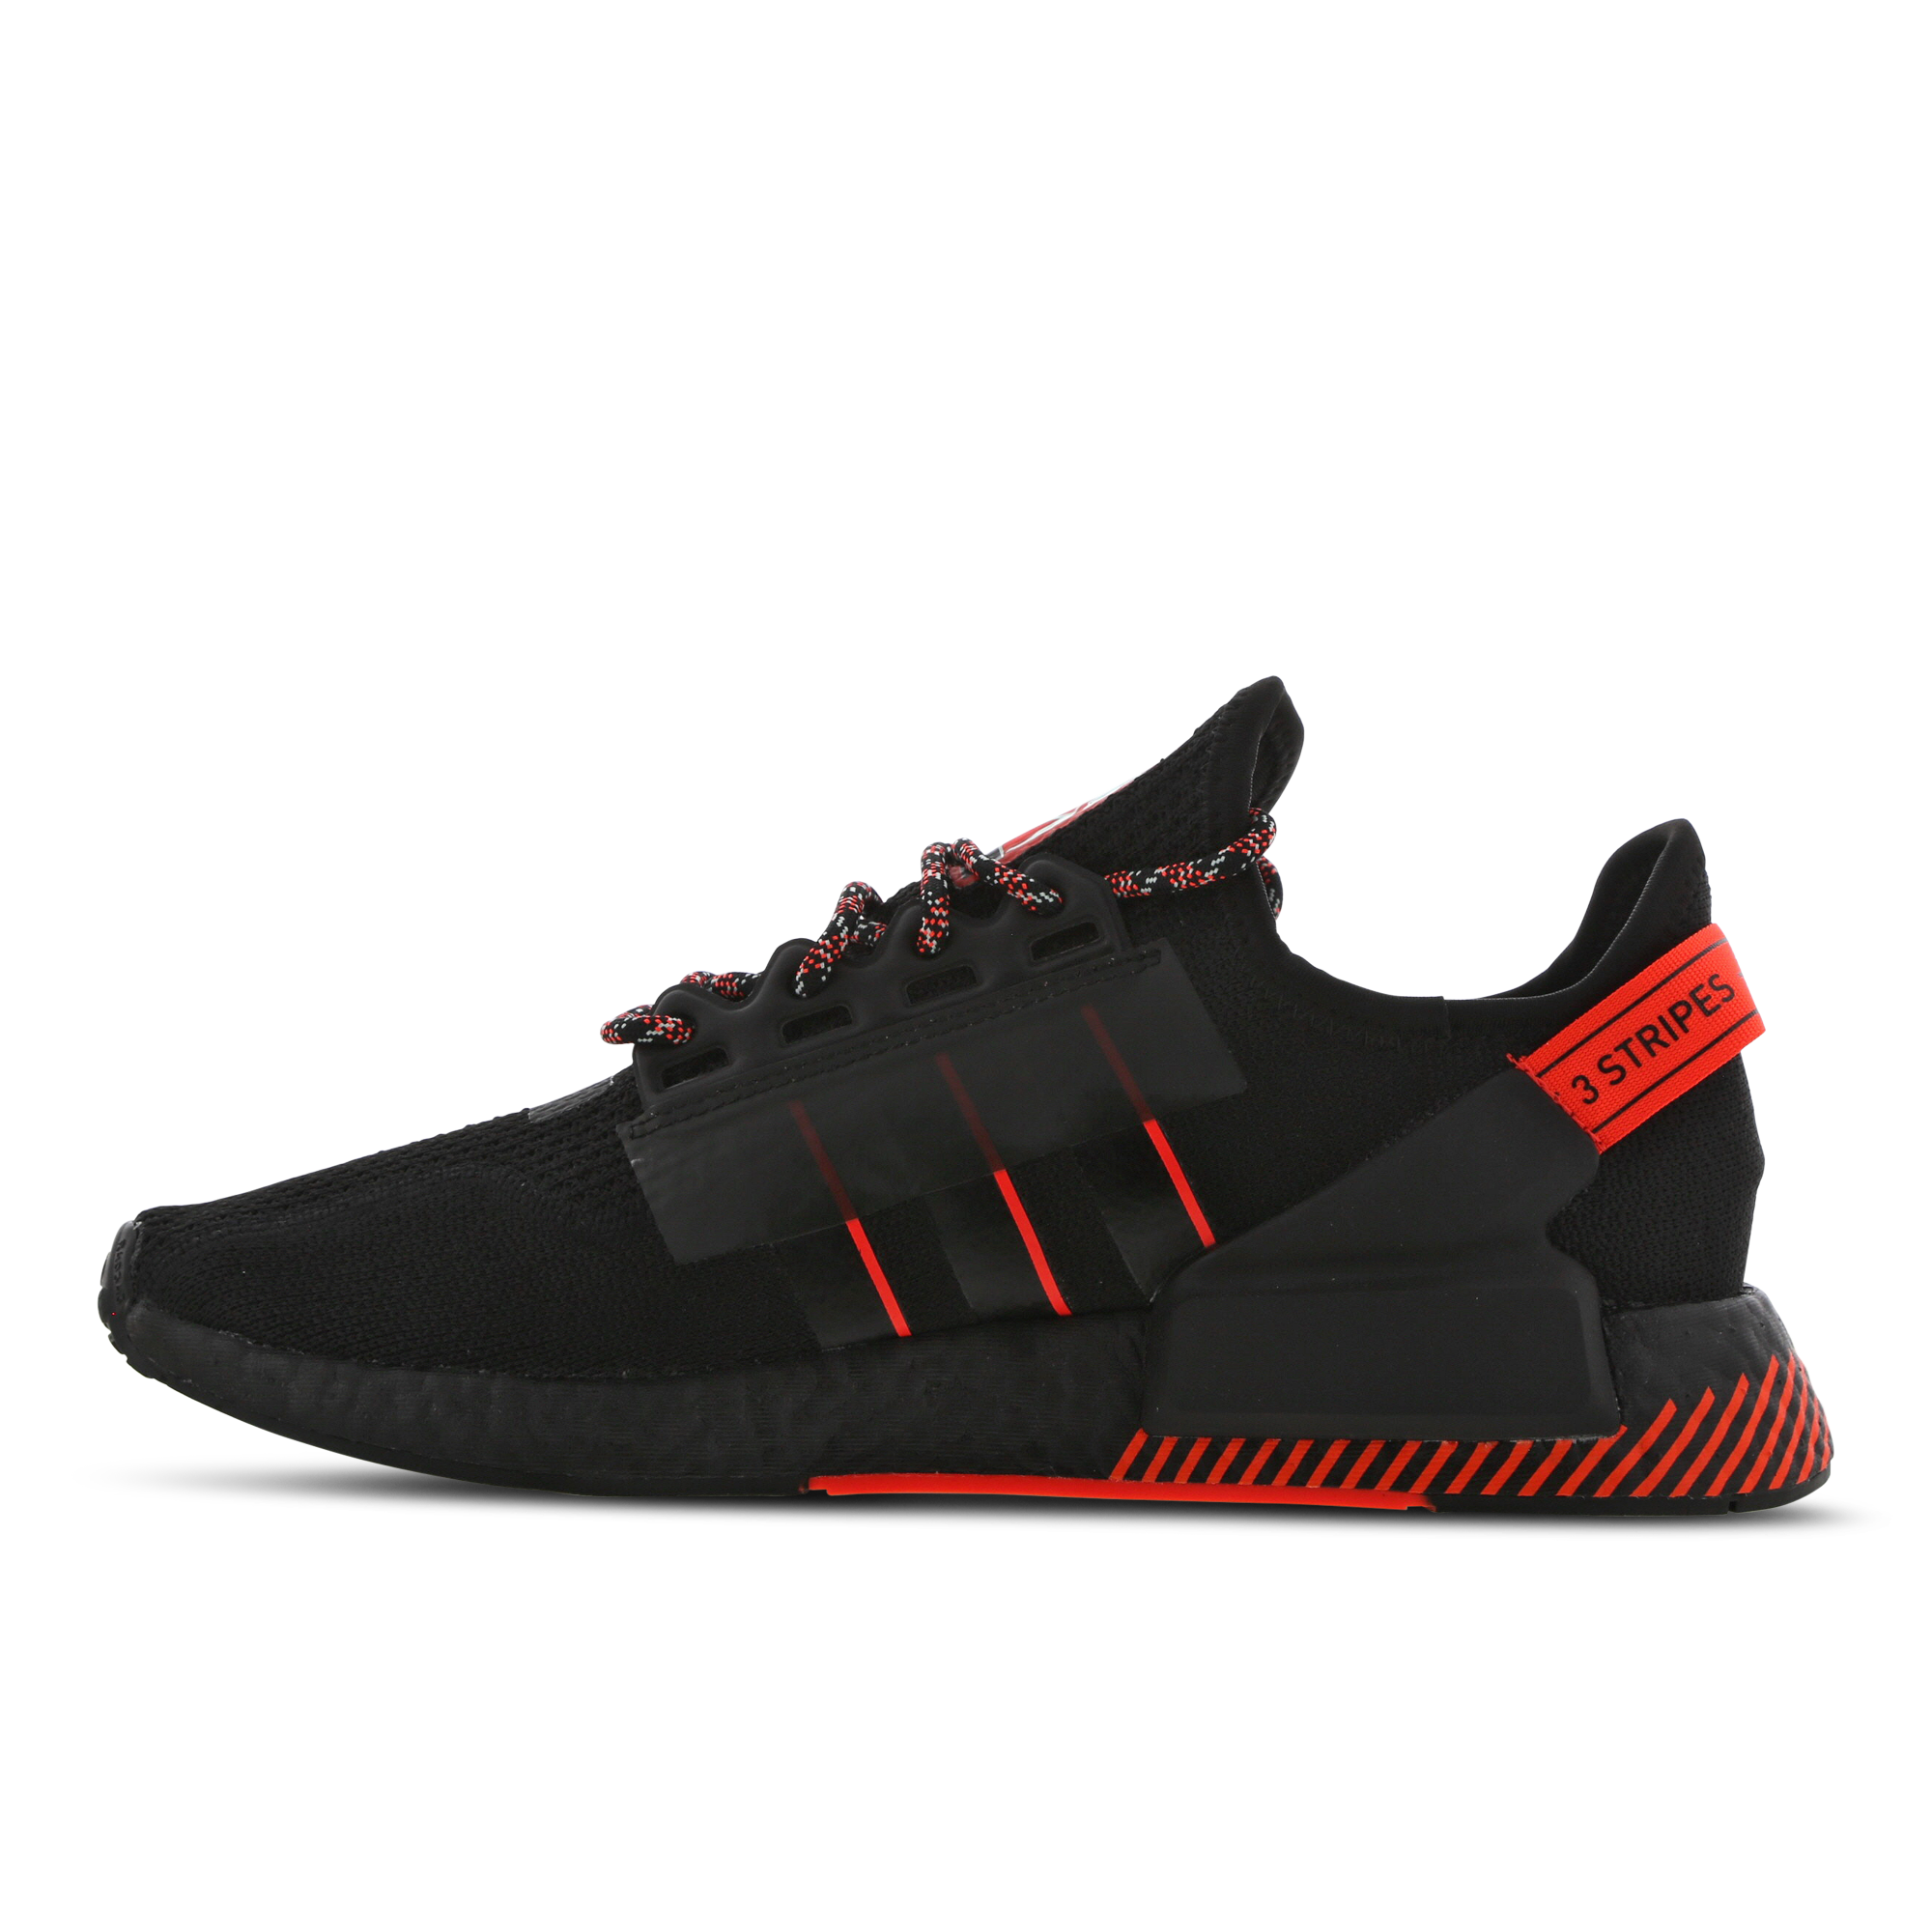 All Links To Buy Black Gum NMD R1 PK BY1887 Yeezys For All